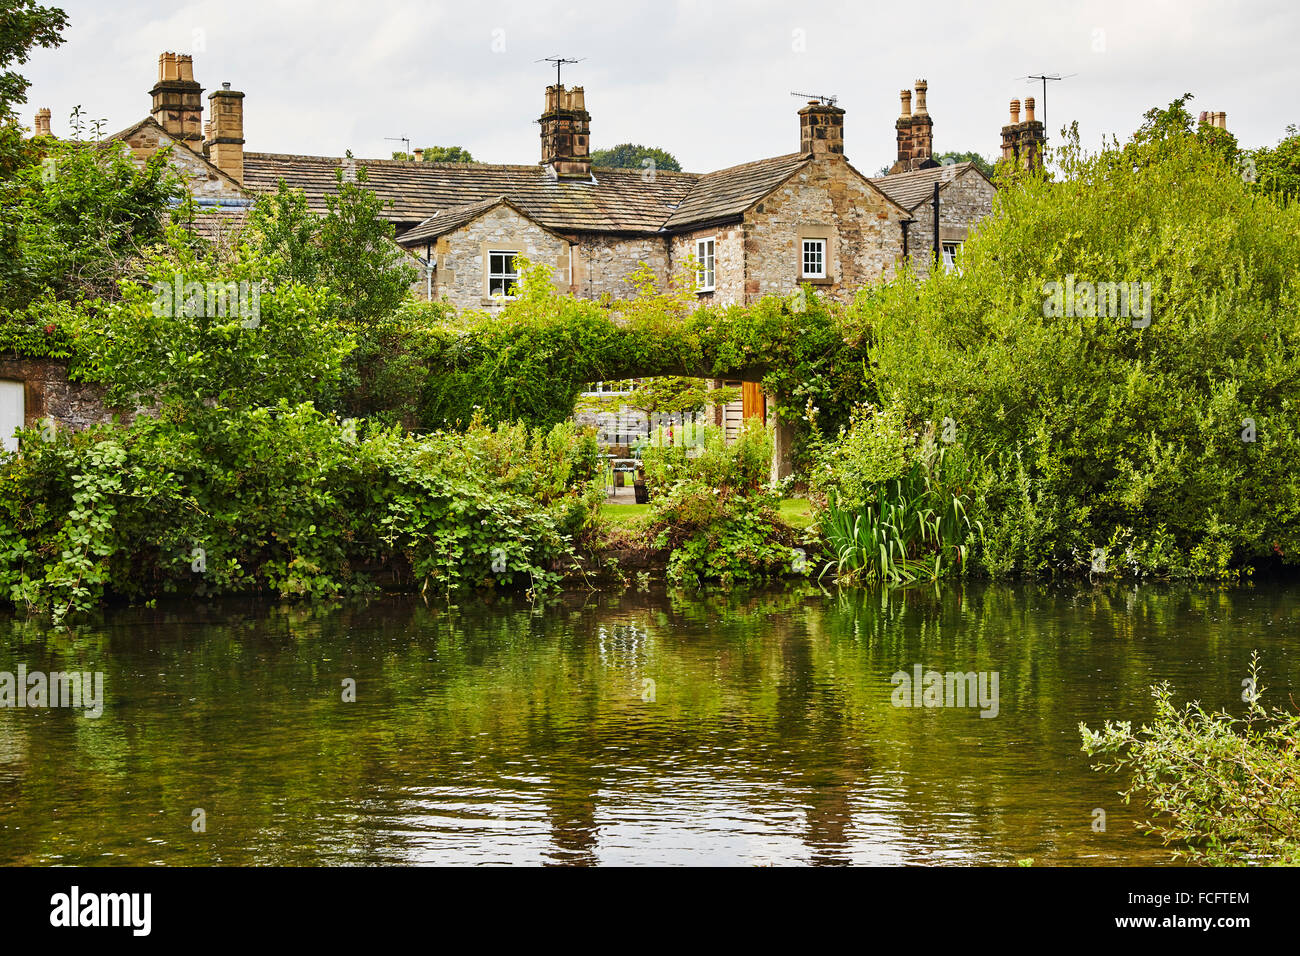 Old cottages next to the River Wye in Bakewell, Derbyshire, England, UK. Stock Photo